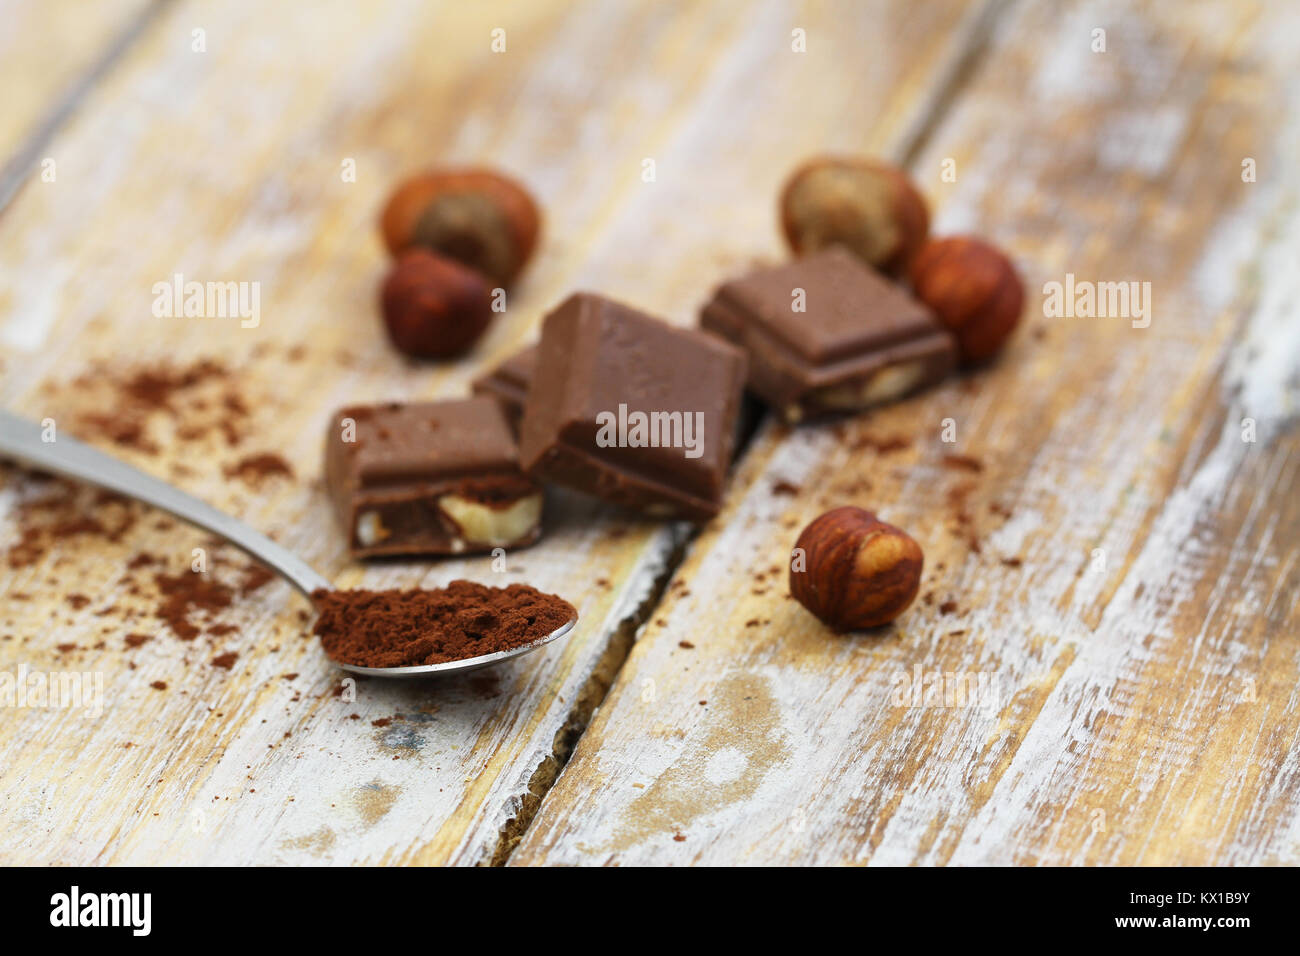 Spoonful of cocoa powder with milk chocolate on rustic wooden surface Stock Photo